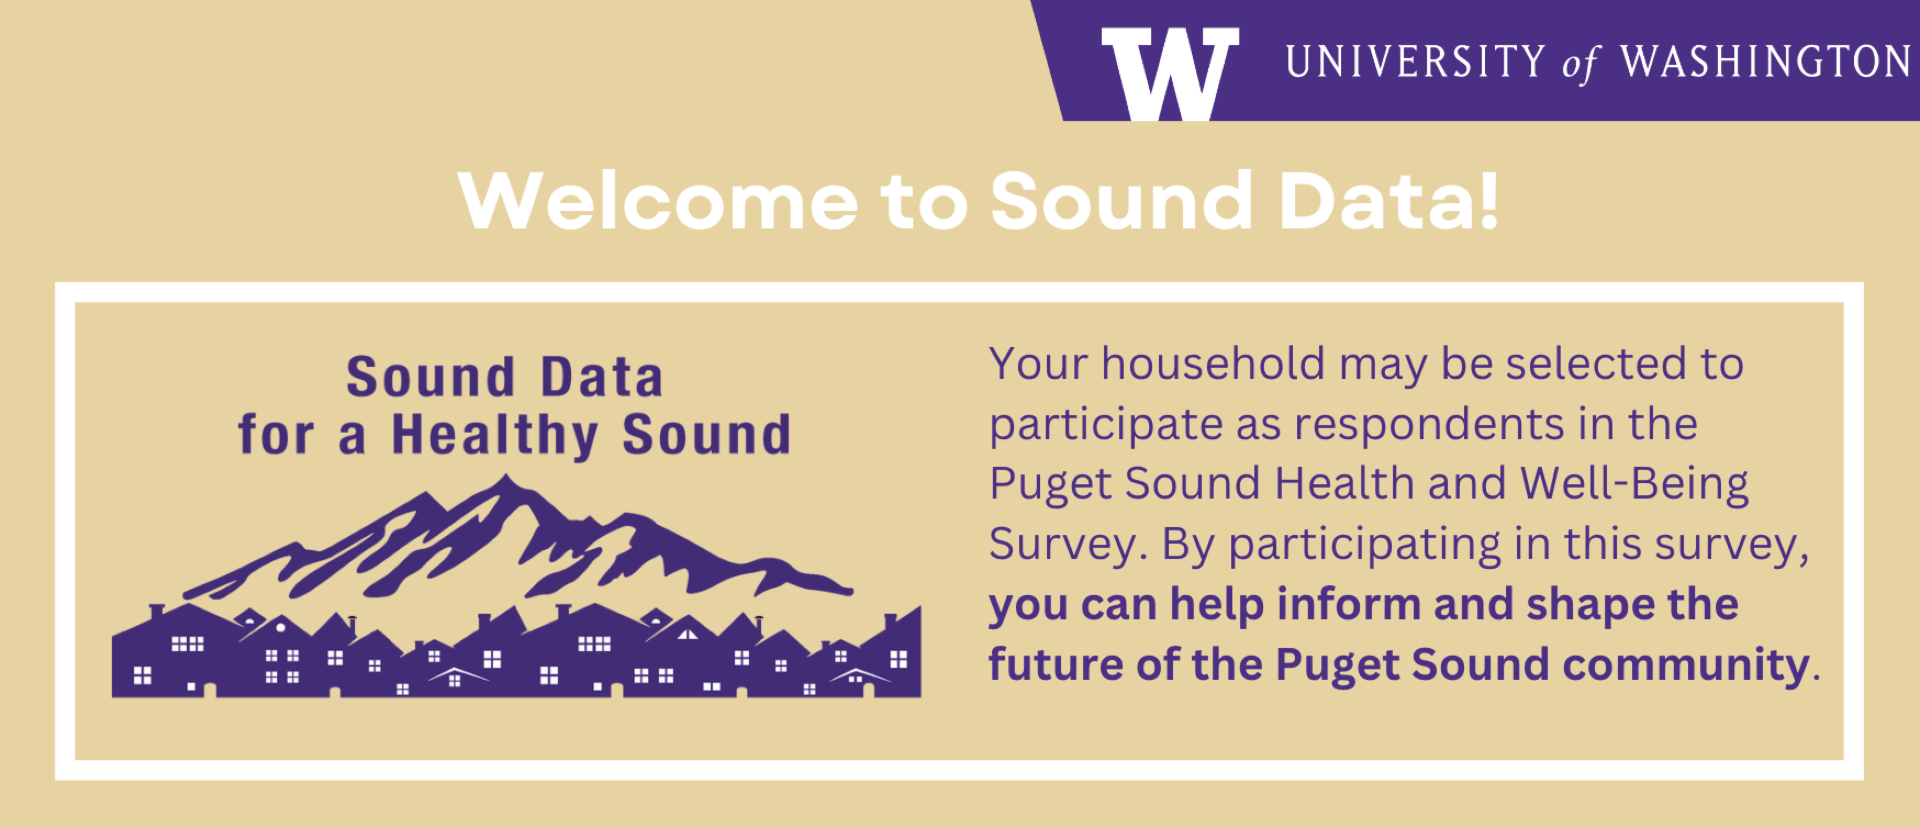 Sound Data for a Healthy Sound